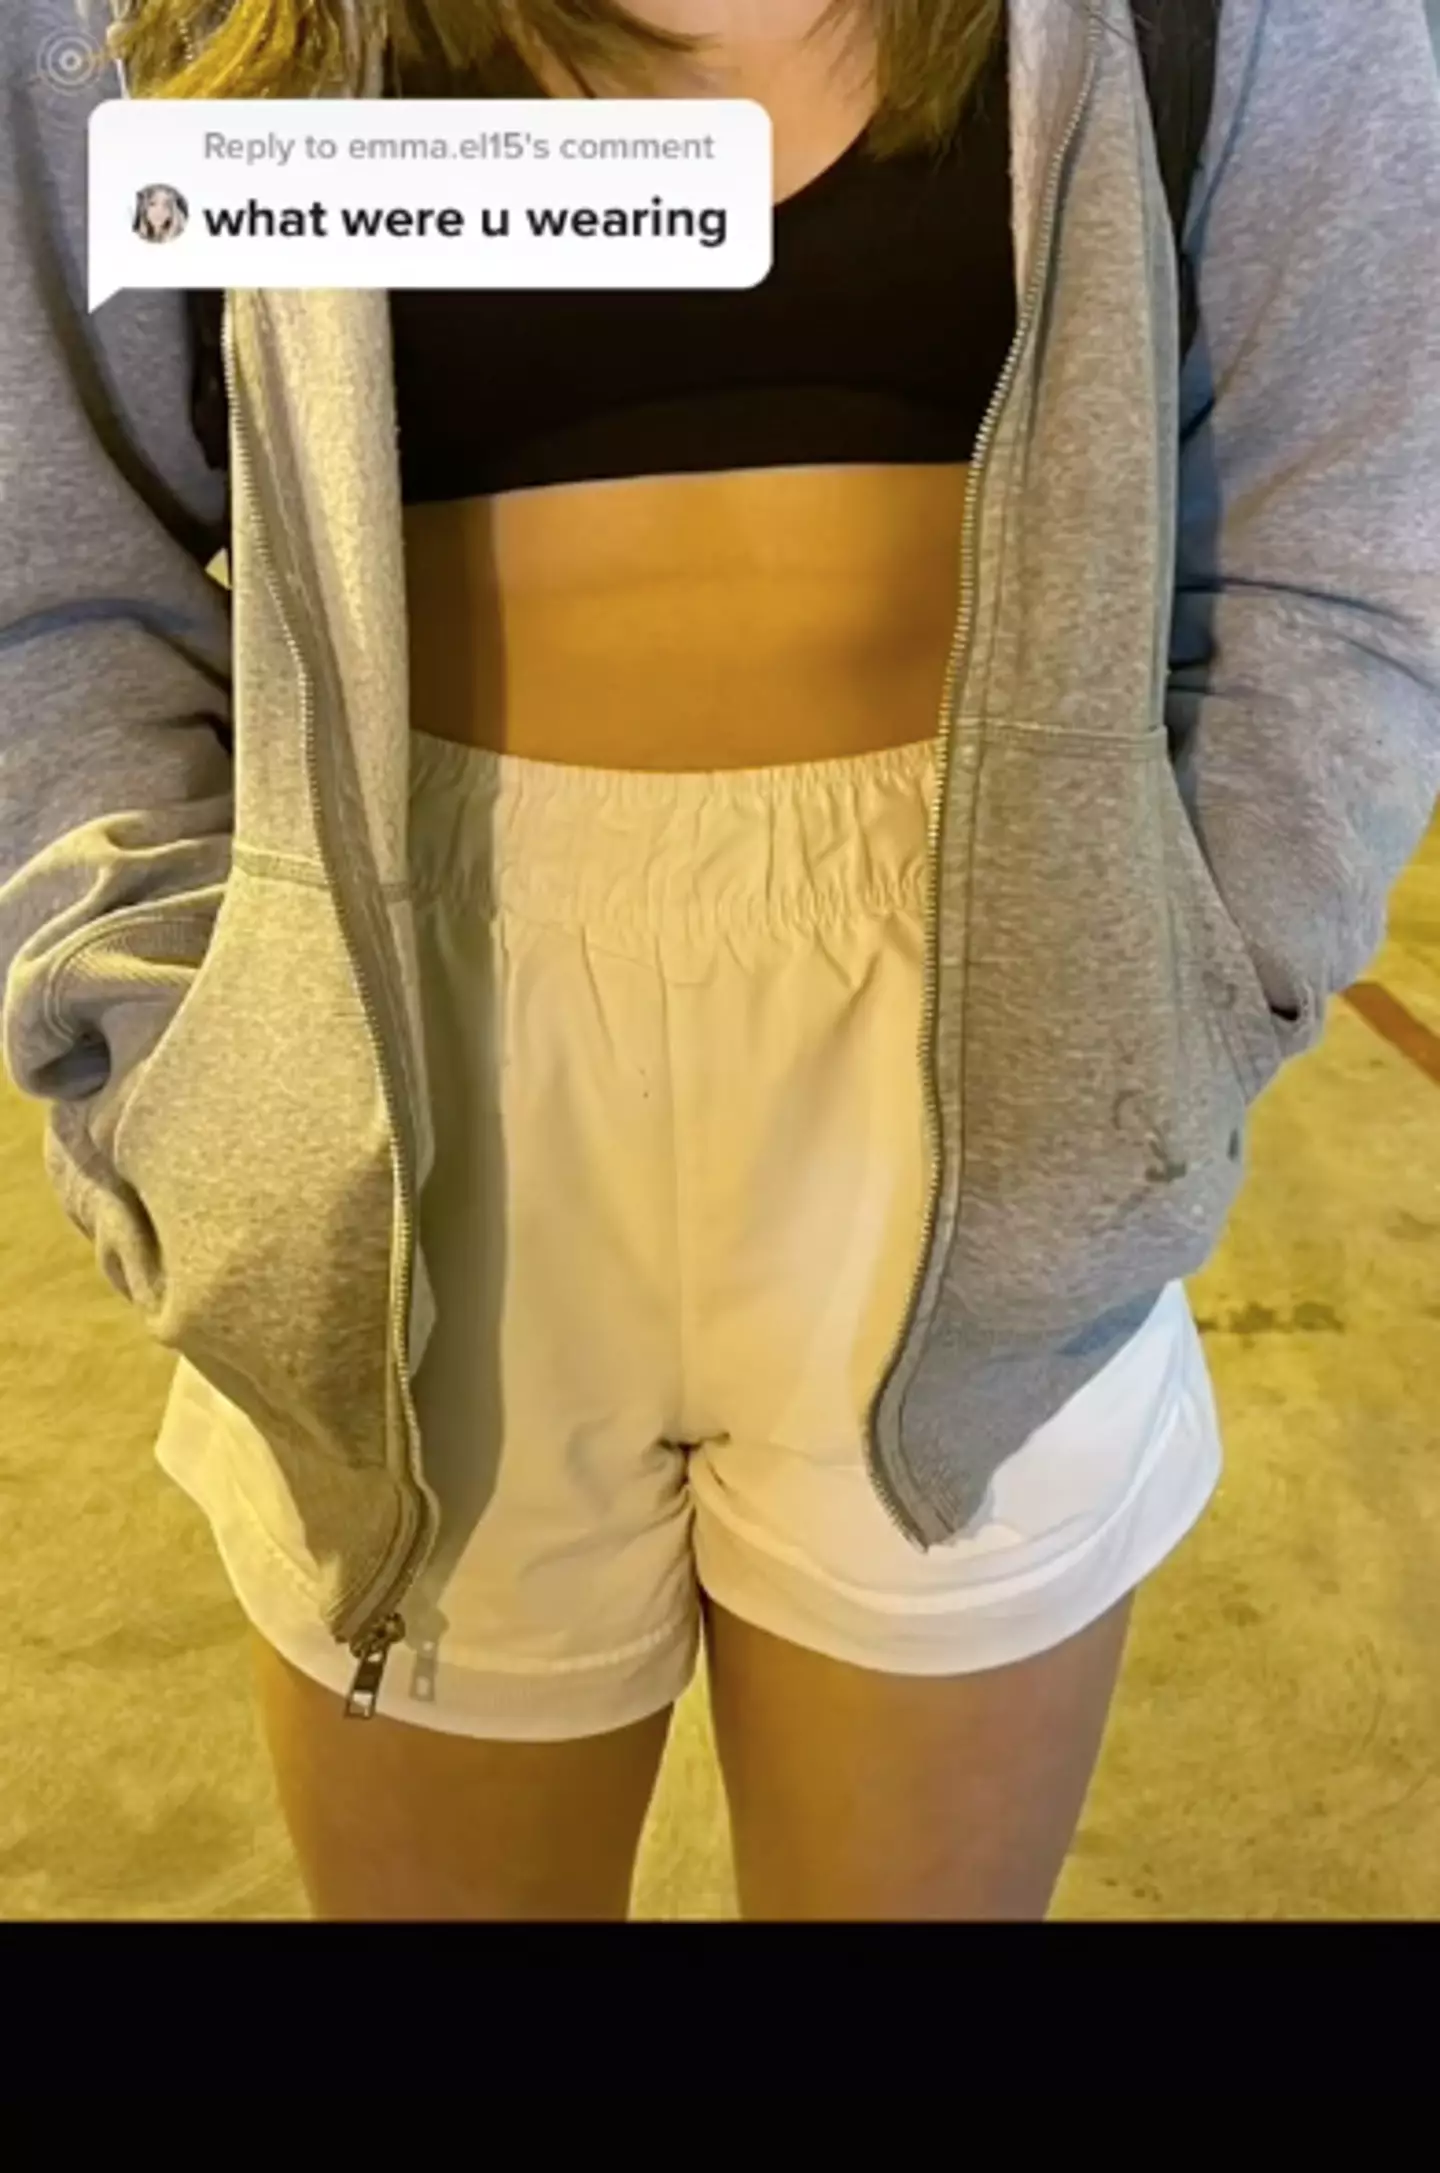 Sierra shared what she was wearing - a normal holiday outfit (